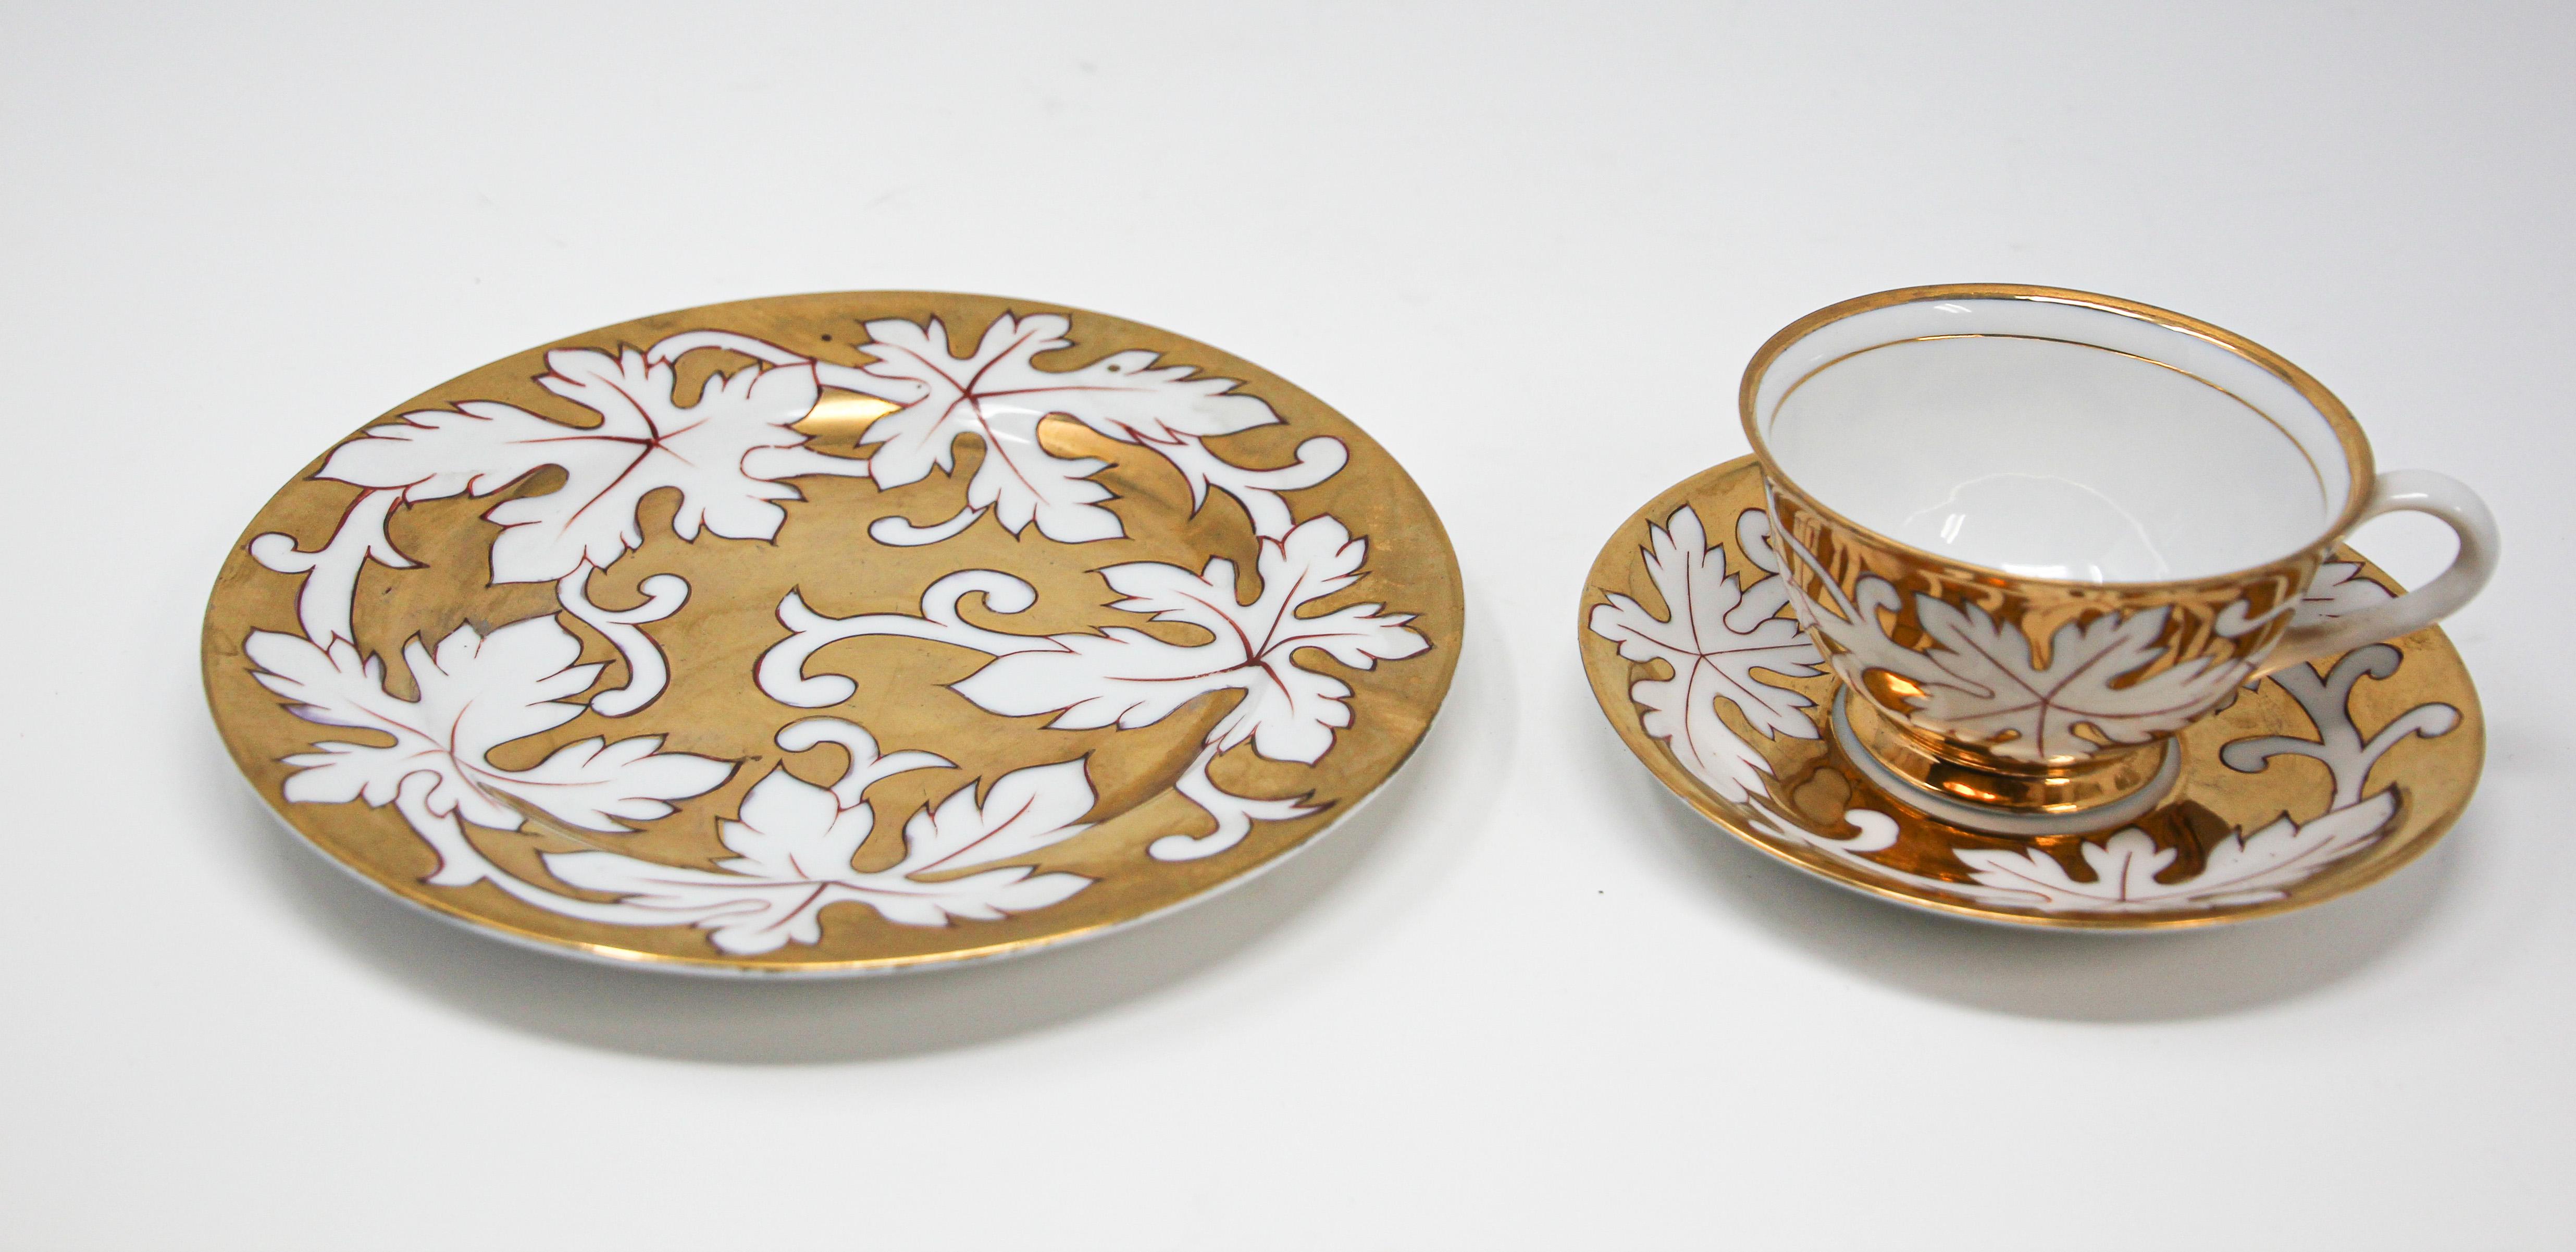 Fine gilt original porcelain coffee or tea cup with saucer and desert plate.
Enjoy the start to your day with the classical sophistication of this fine porcelain gilt trio coffee, tea set.
This hand painted set are crafted of fine porcelain and